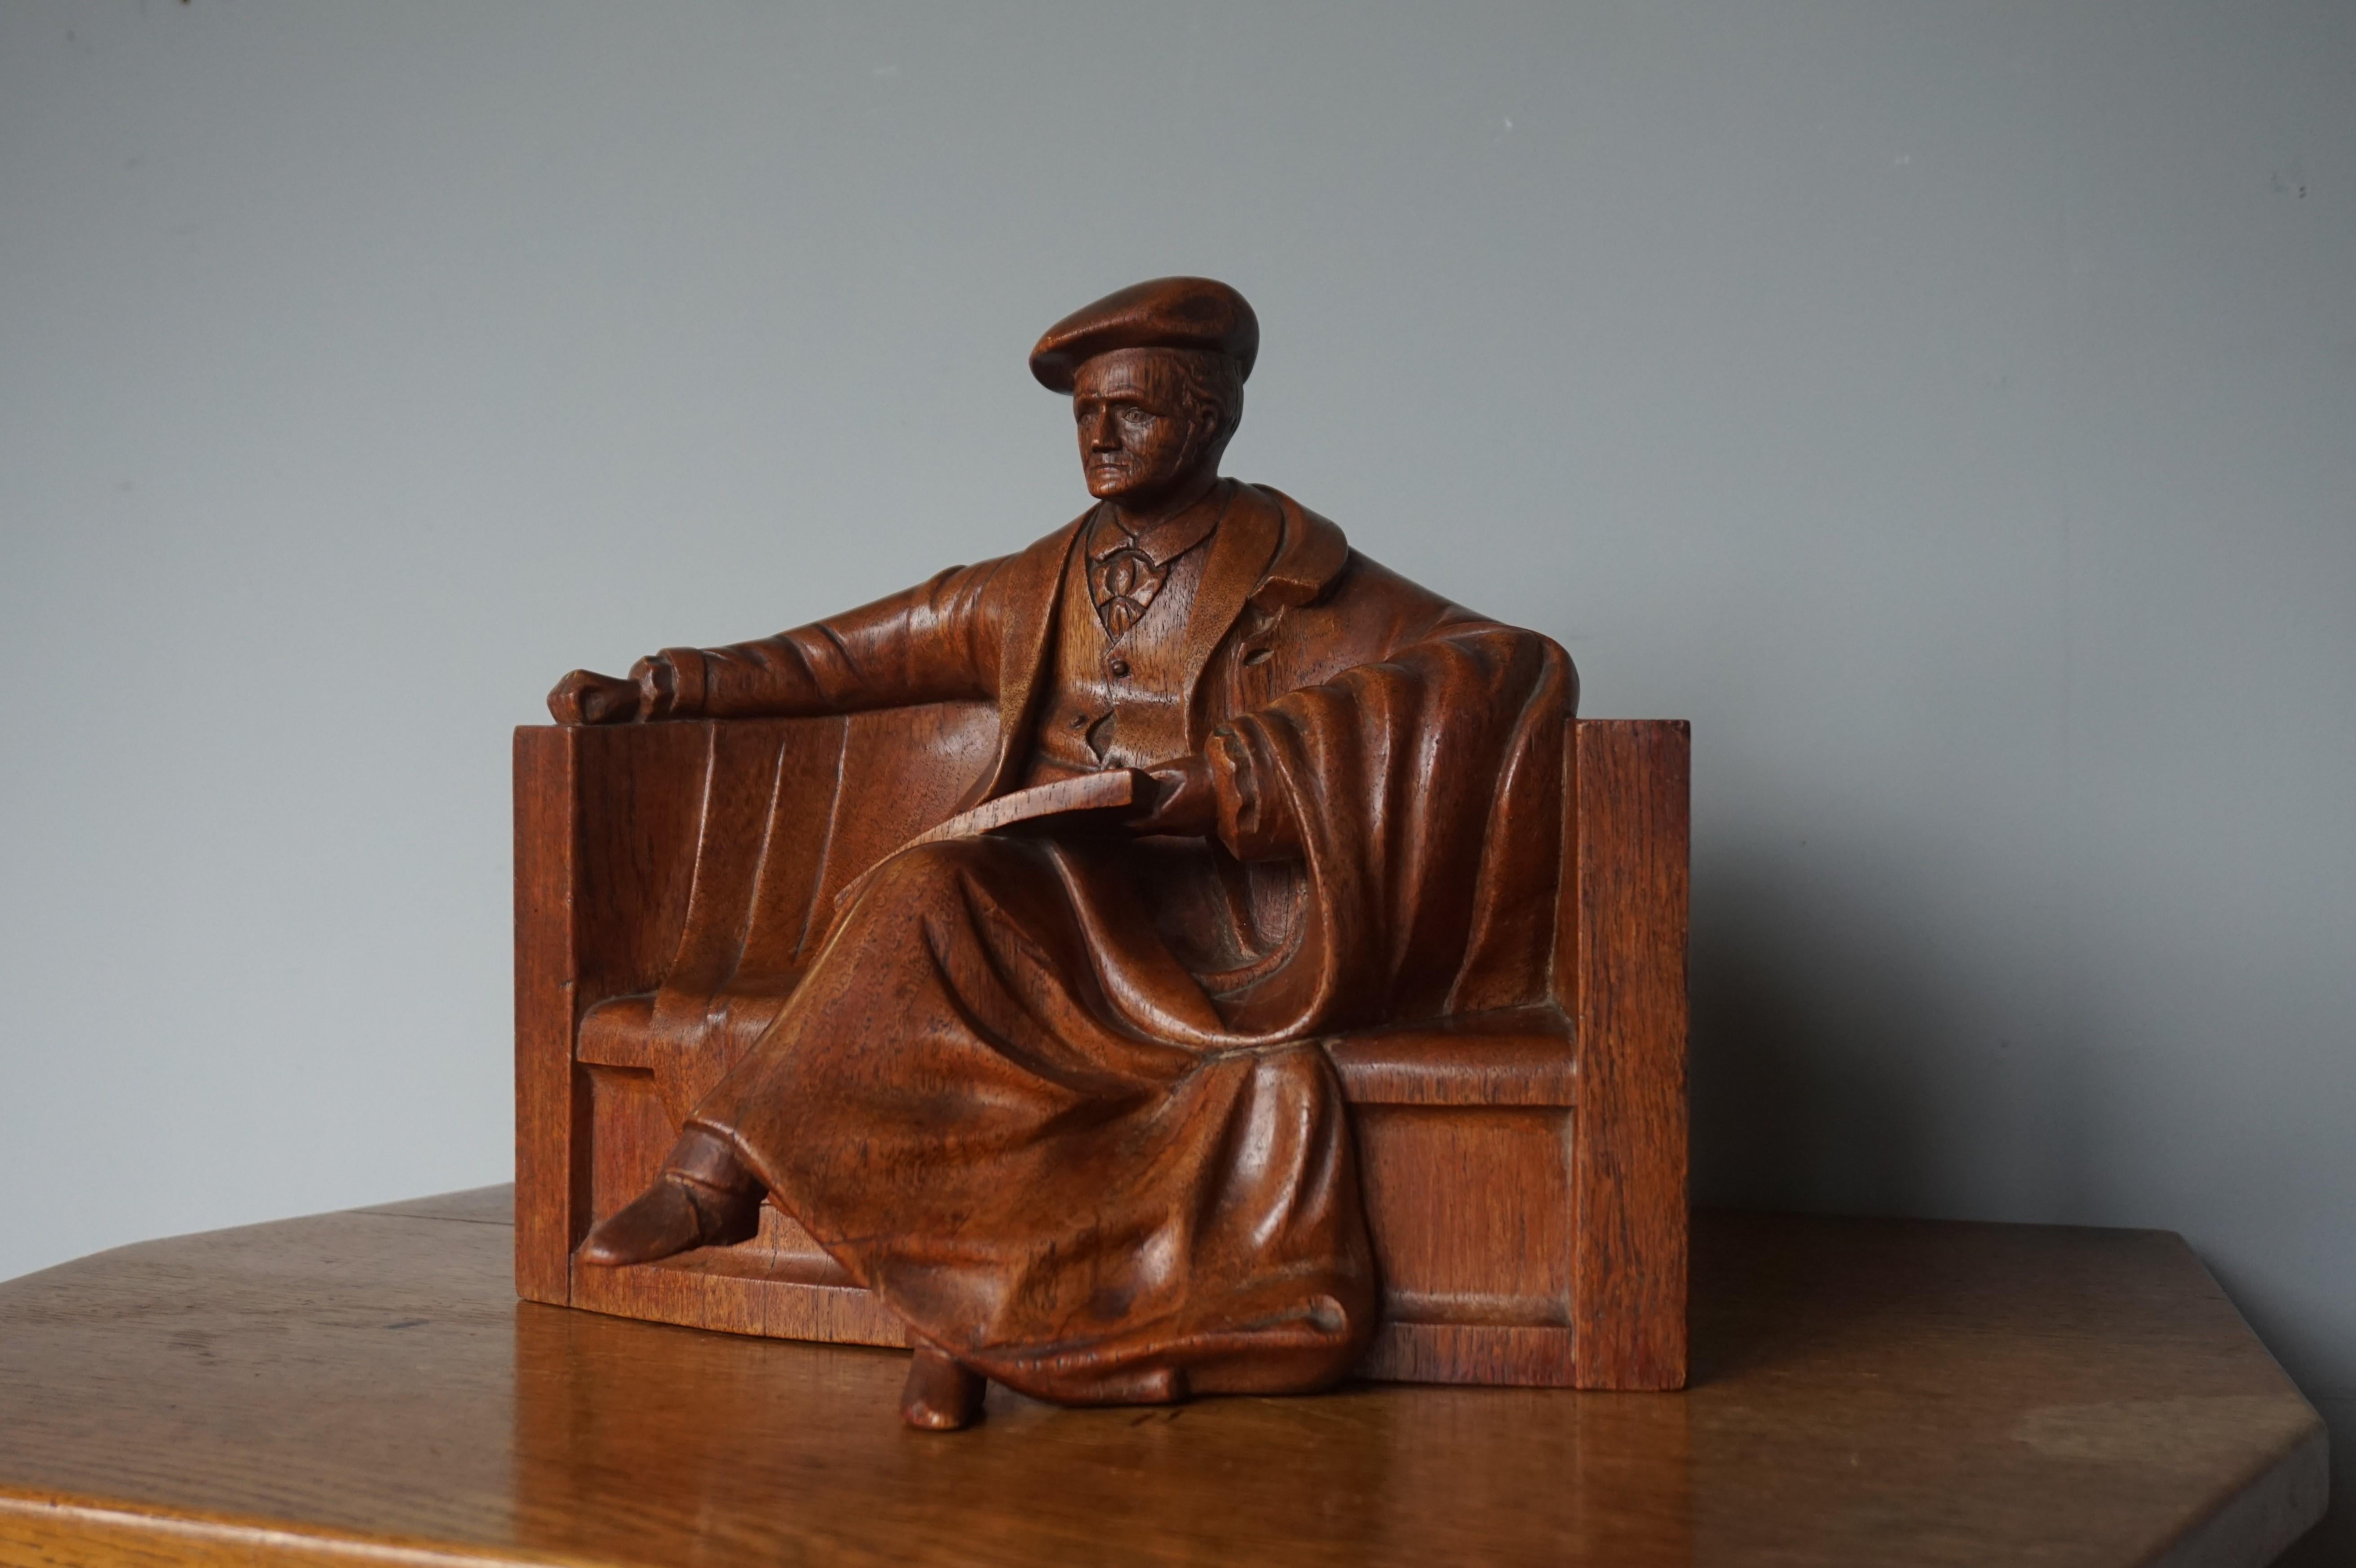 Unique & Stylish Sculpture of a Seated Scholar / Academic Made of Solid Teakwood 5